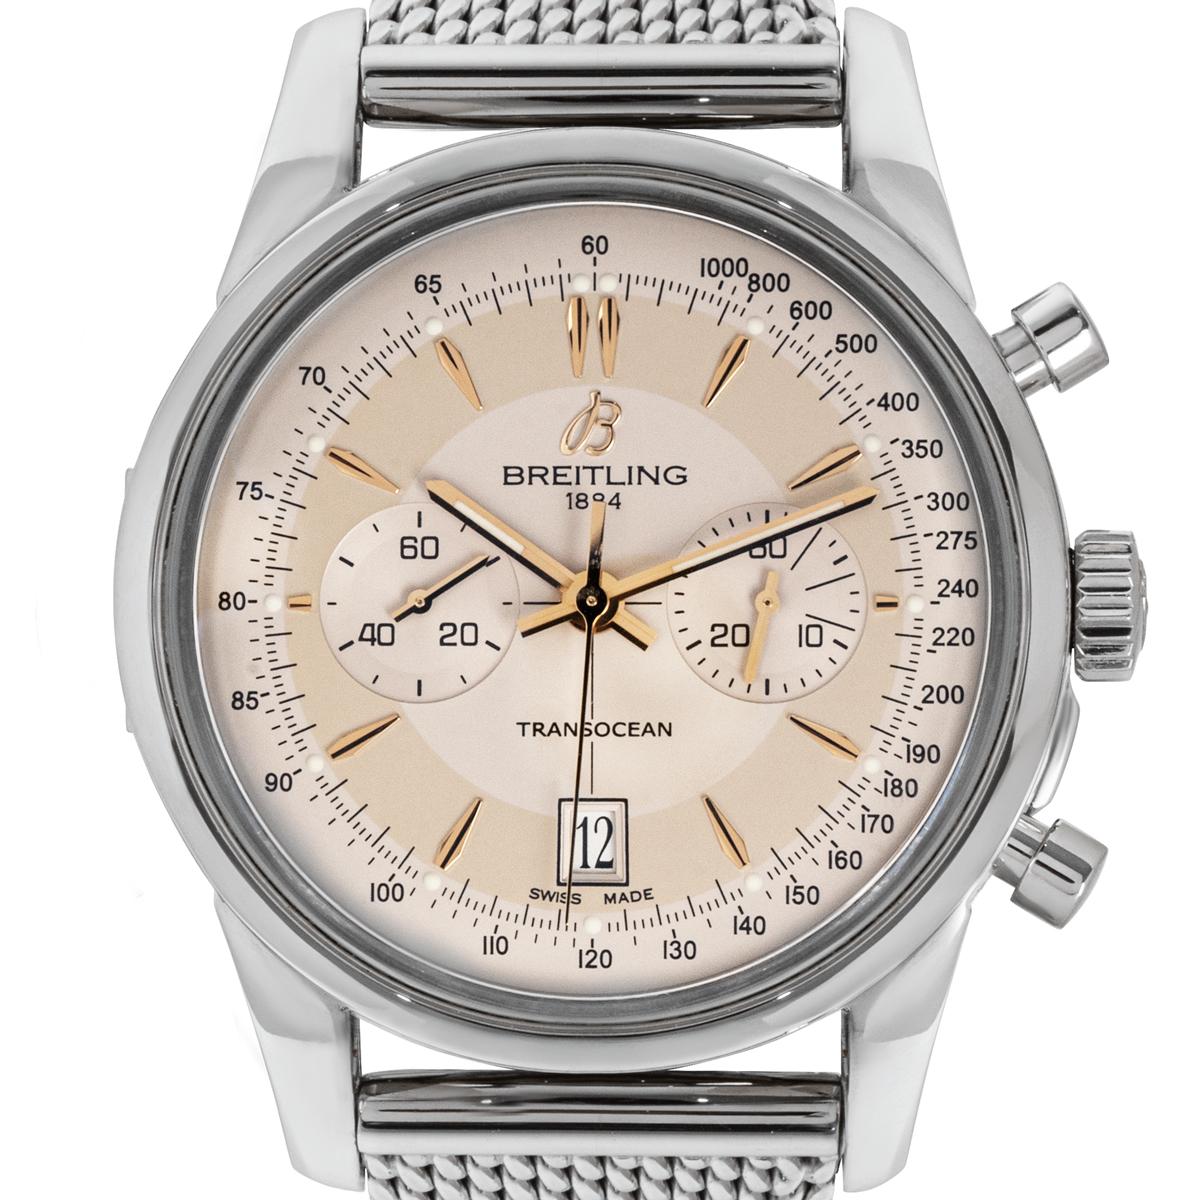 A limited edition stainless steel Transocean Chronograph men's wristwatch, by Breitling.

The silver dial has applied hour markers, a 30-minute recorder at 3 o'clock, a date indiator at 6 o'clock, small seconds at 9 o'clock, a tachymeter scale